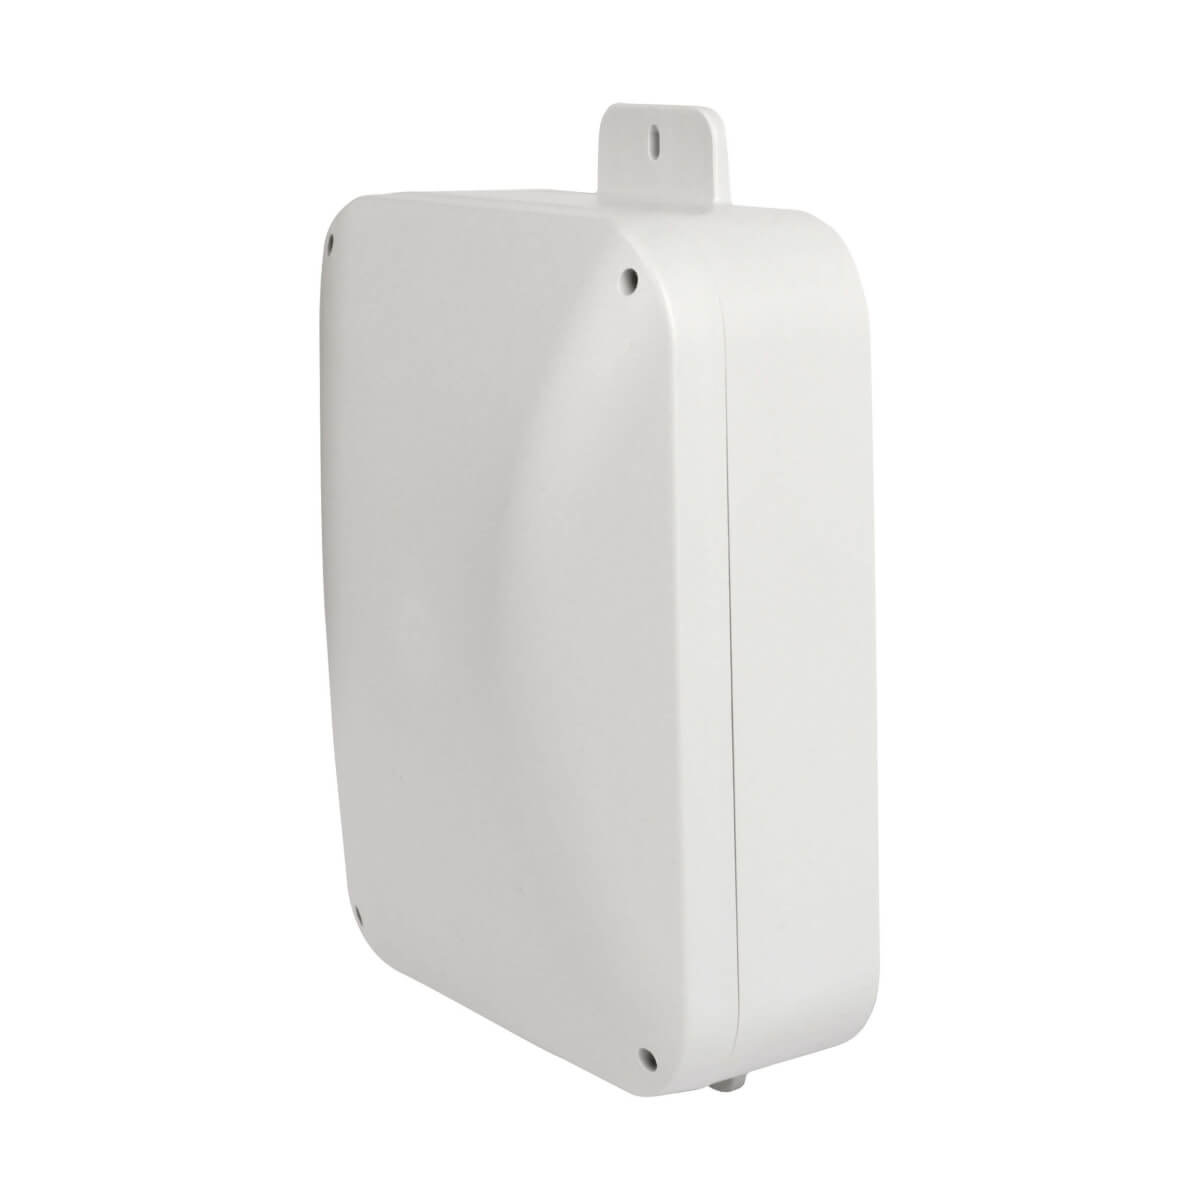 Wireless Access Point Enclosure 13 X 9In